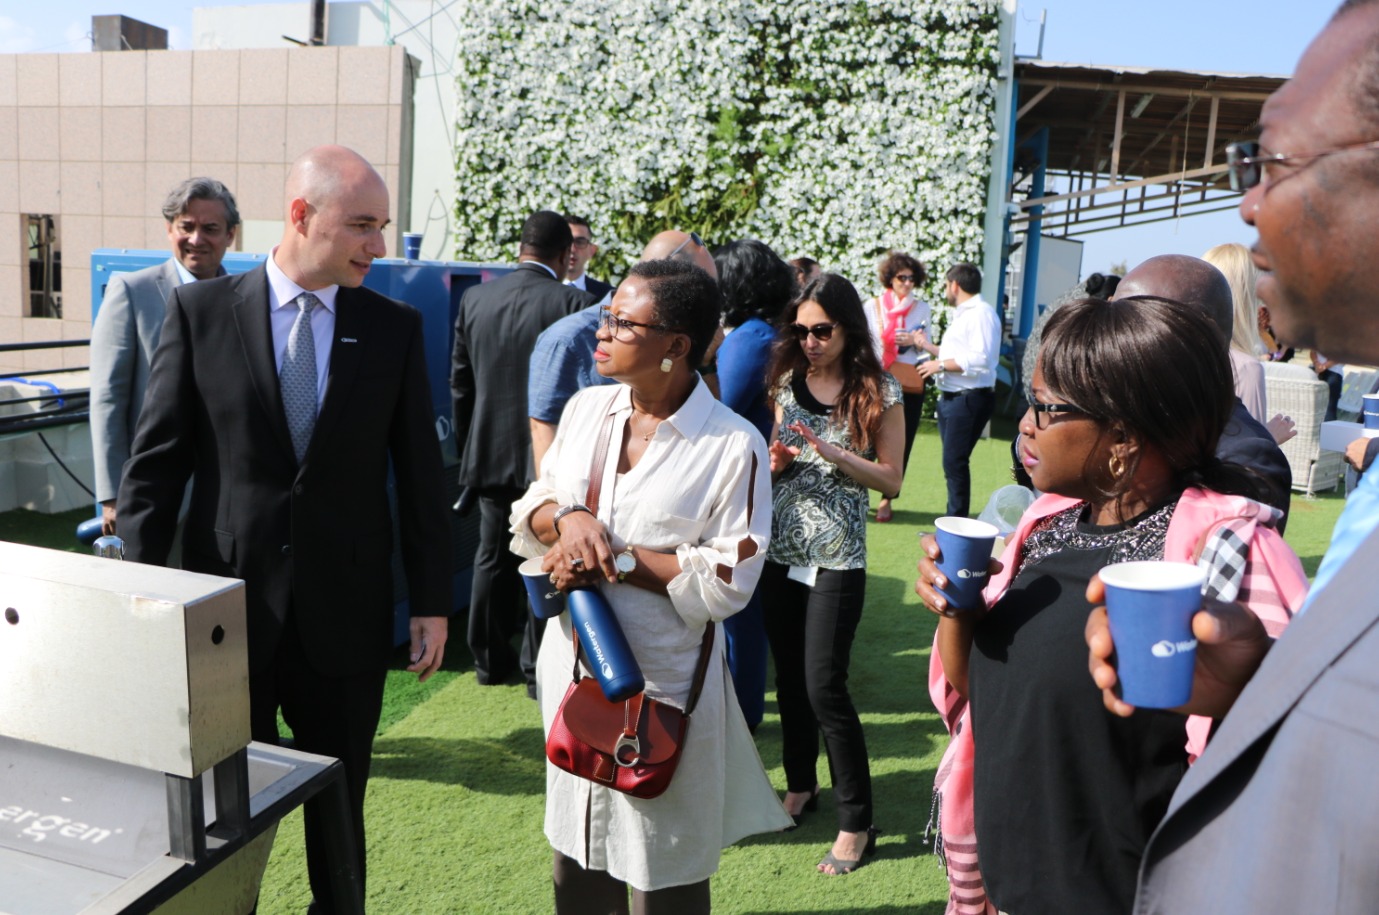 Delegation of UN Ambassadors See, Hear and Taste From Watergen’s Life-Saving Technology